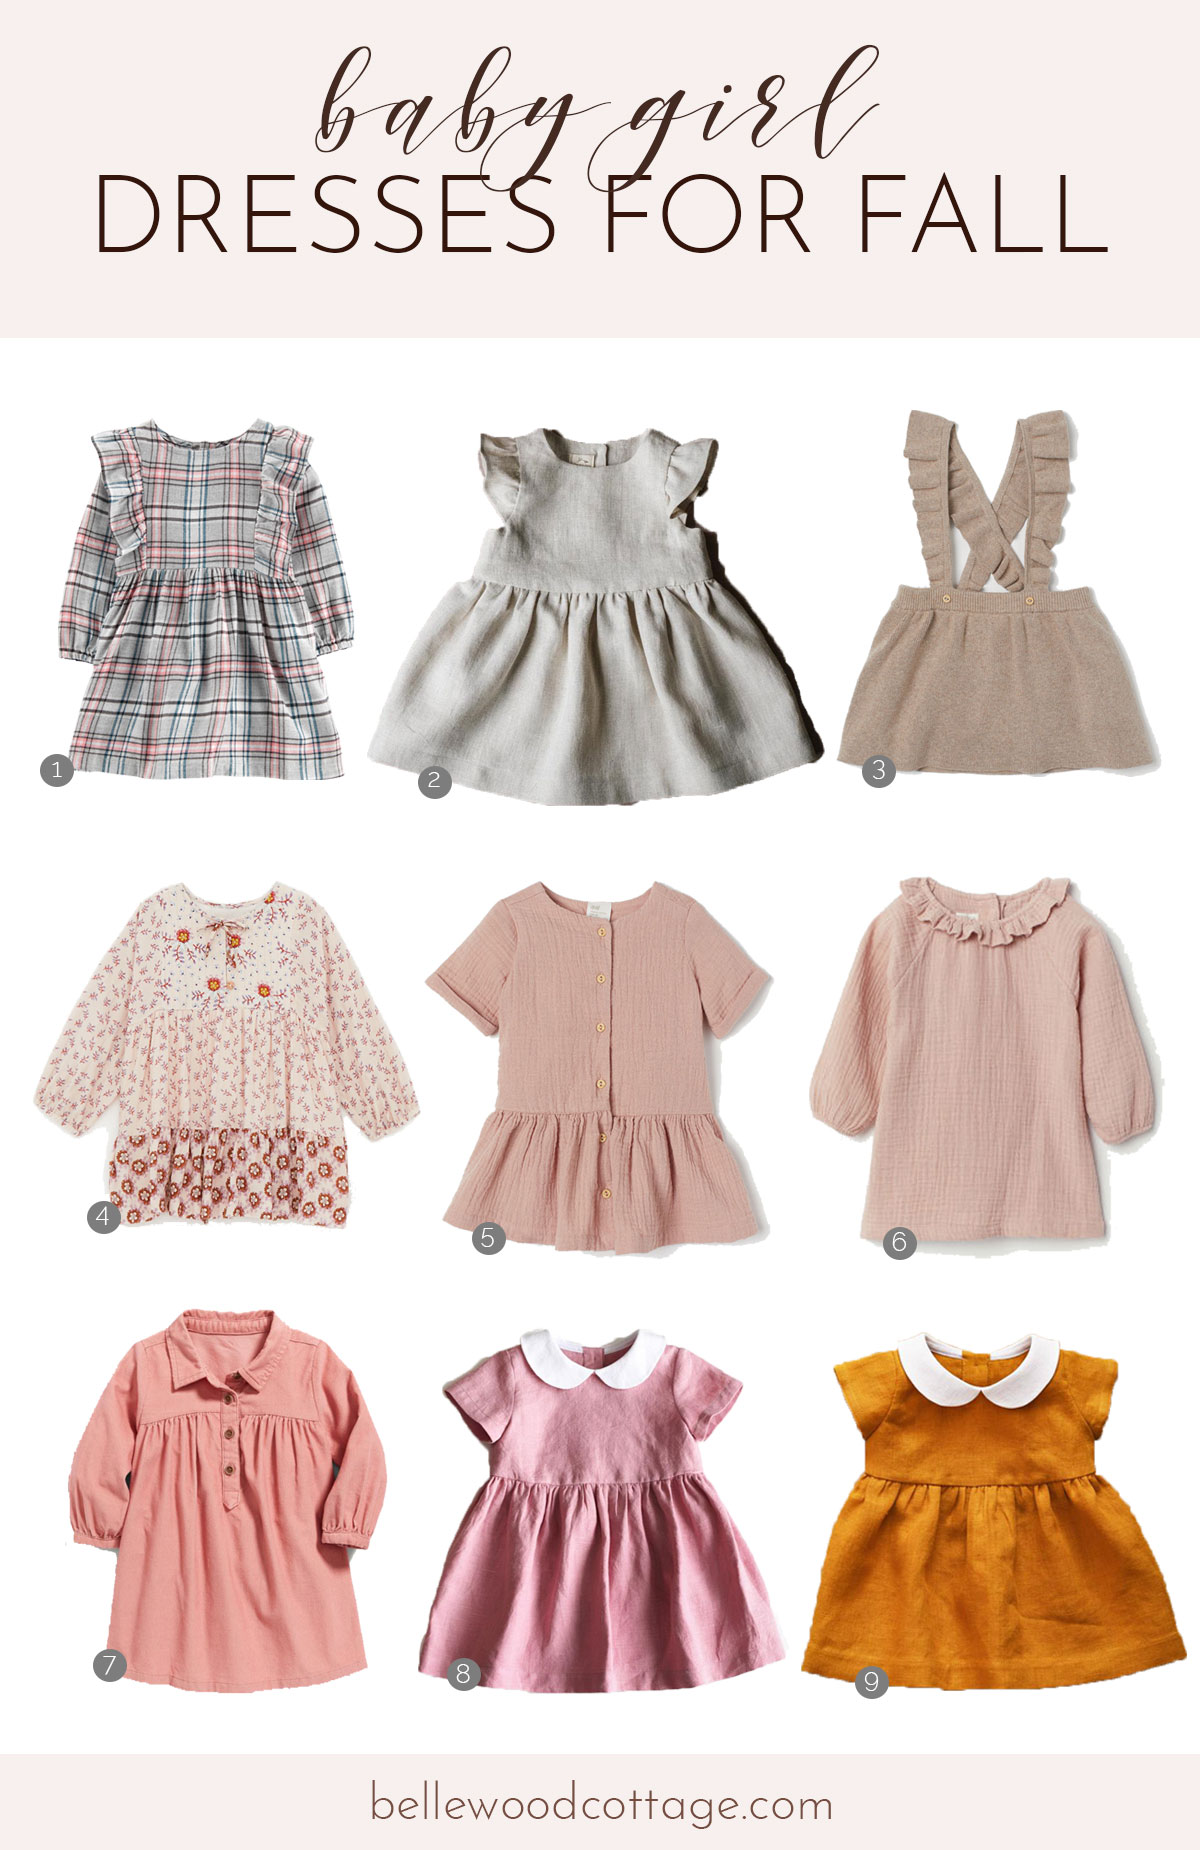 Nine baby girl dresses in pink colors in three by three rows.